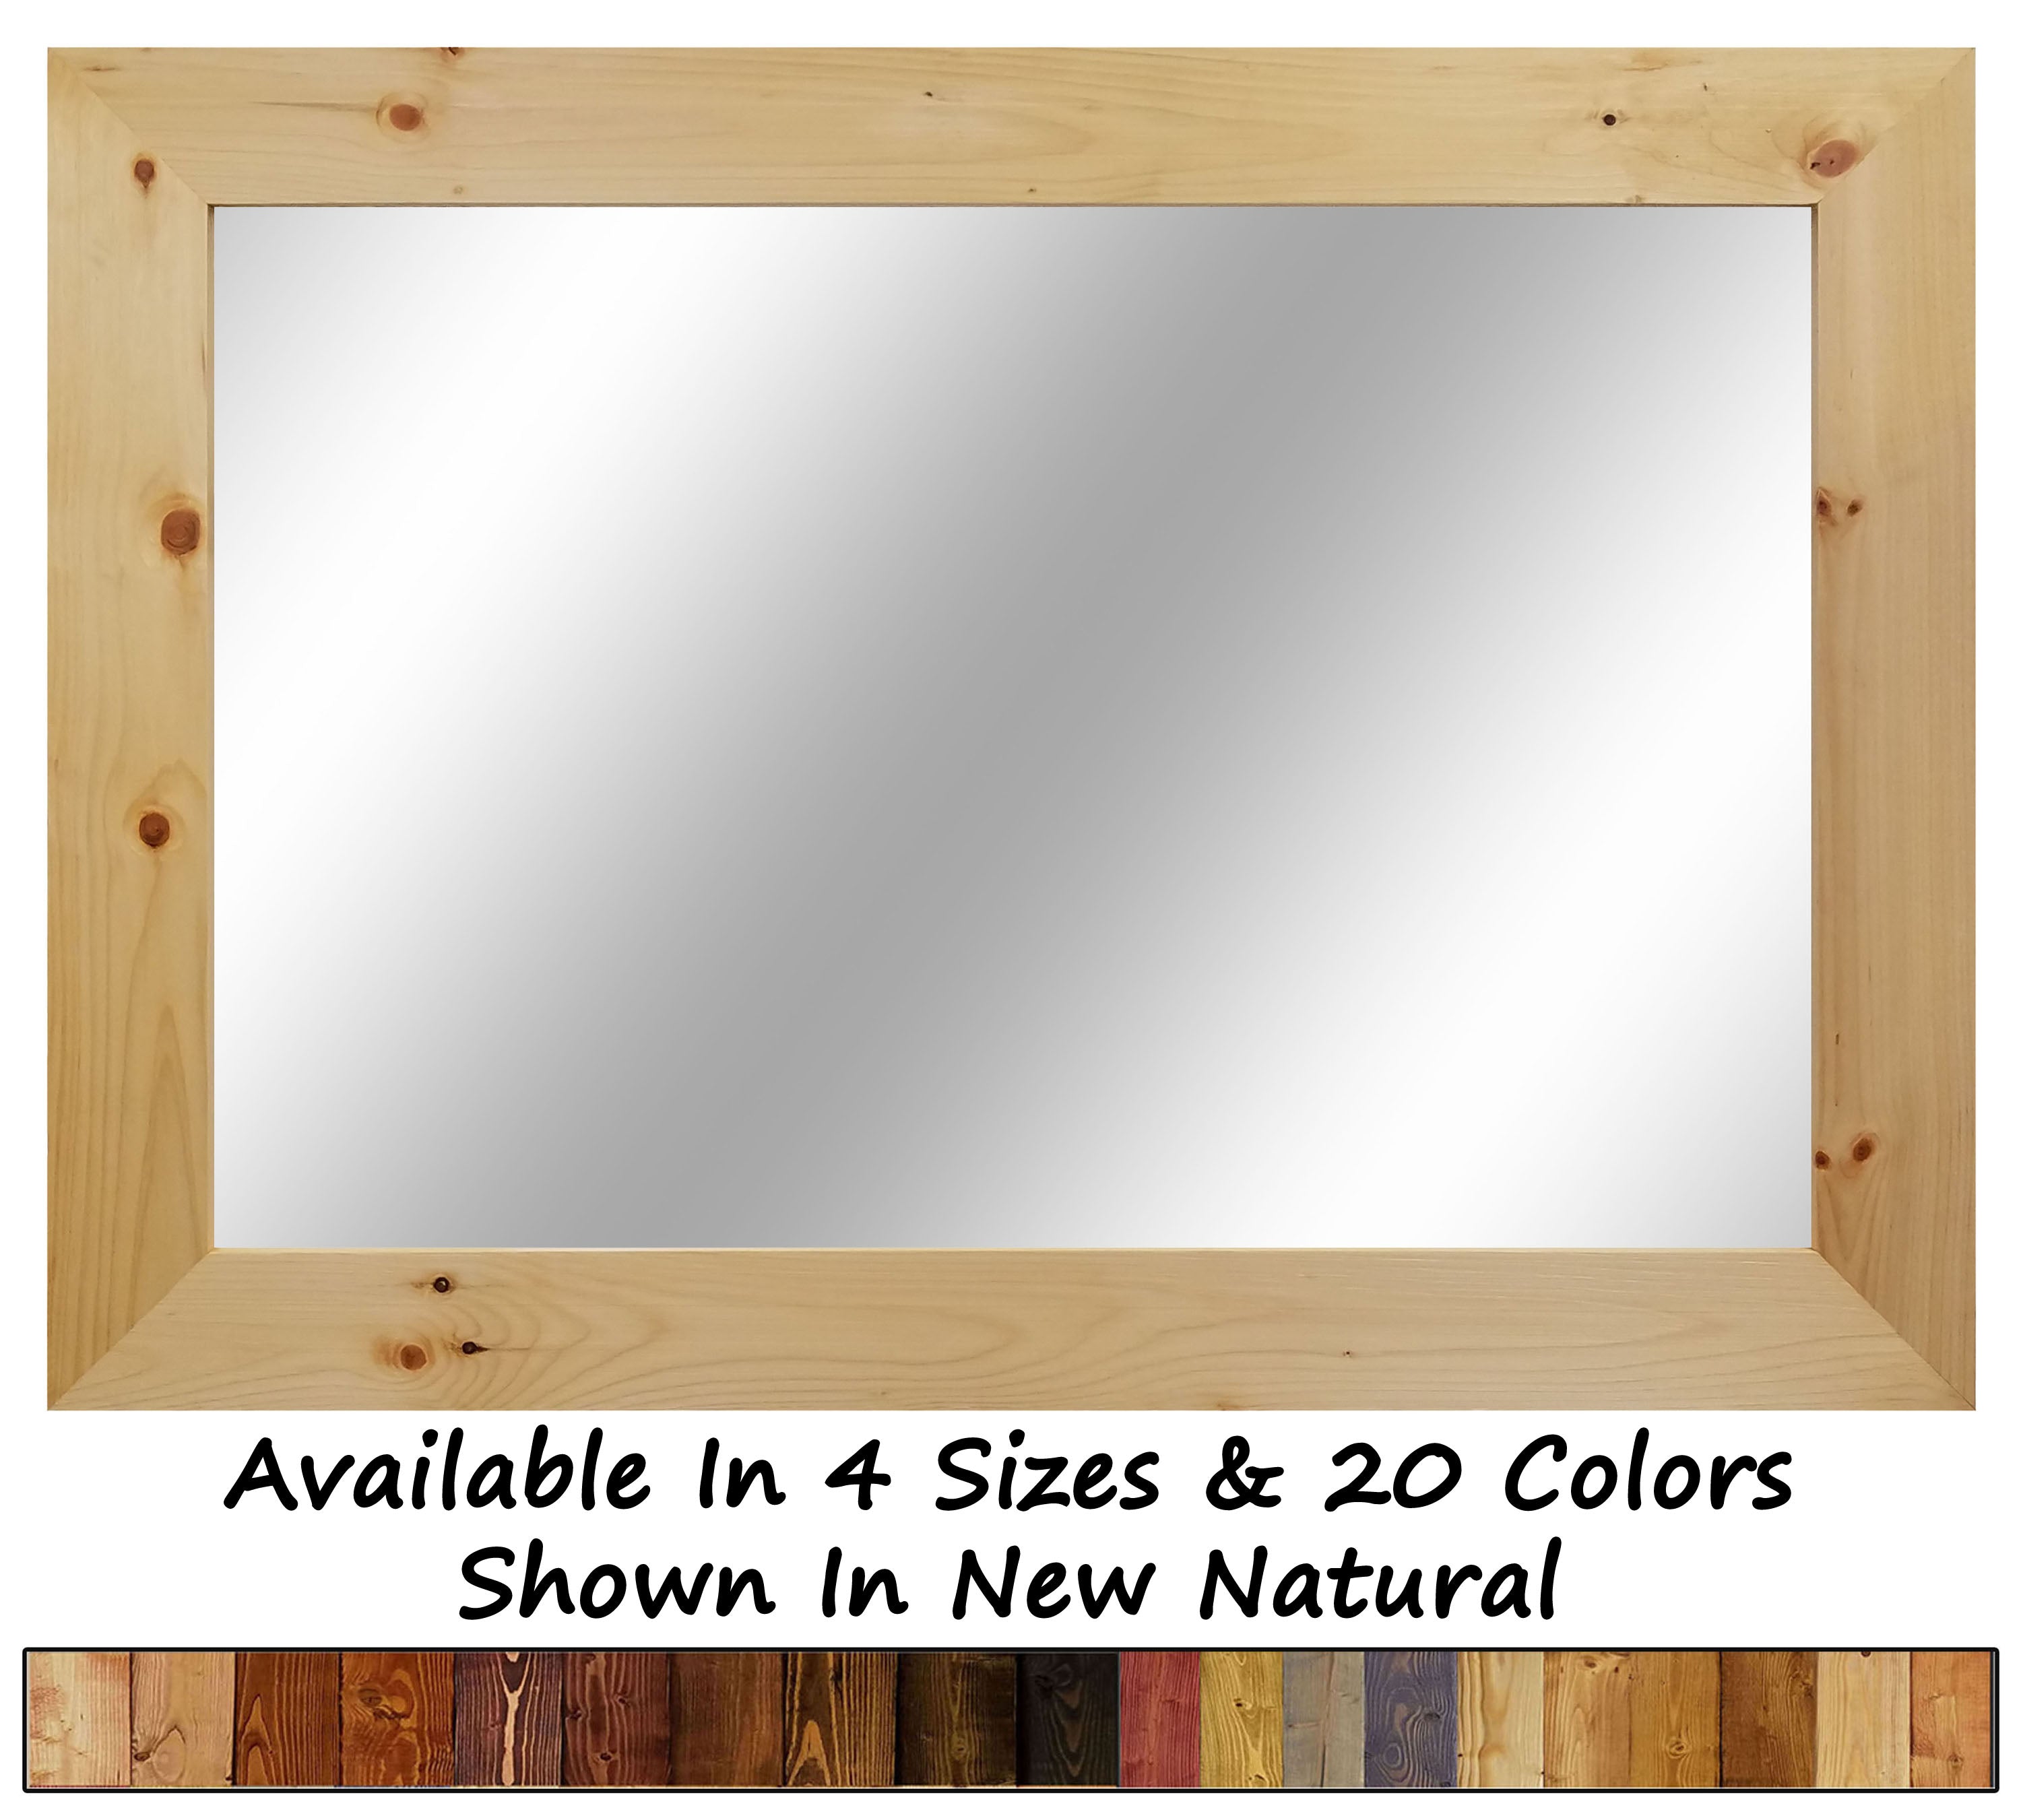 Shiplap Rustic Wood Framed Mirror, 20 Stain Colors - Shown In New Natural